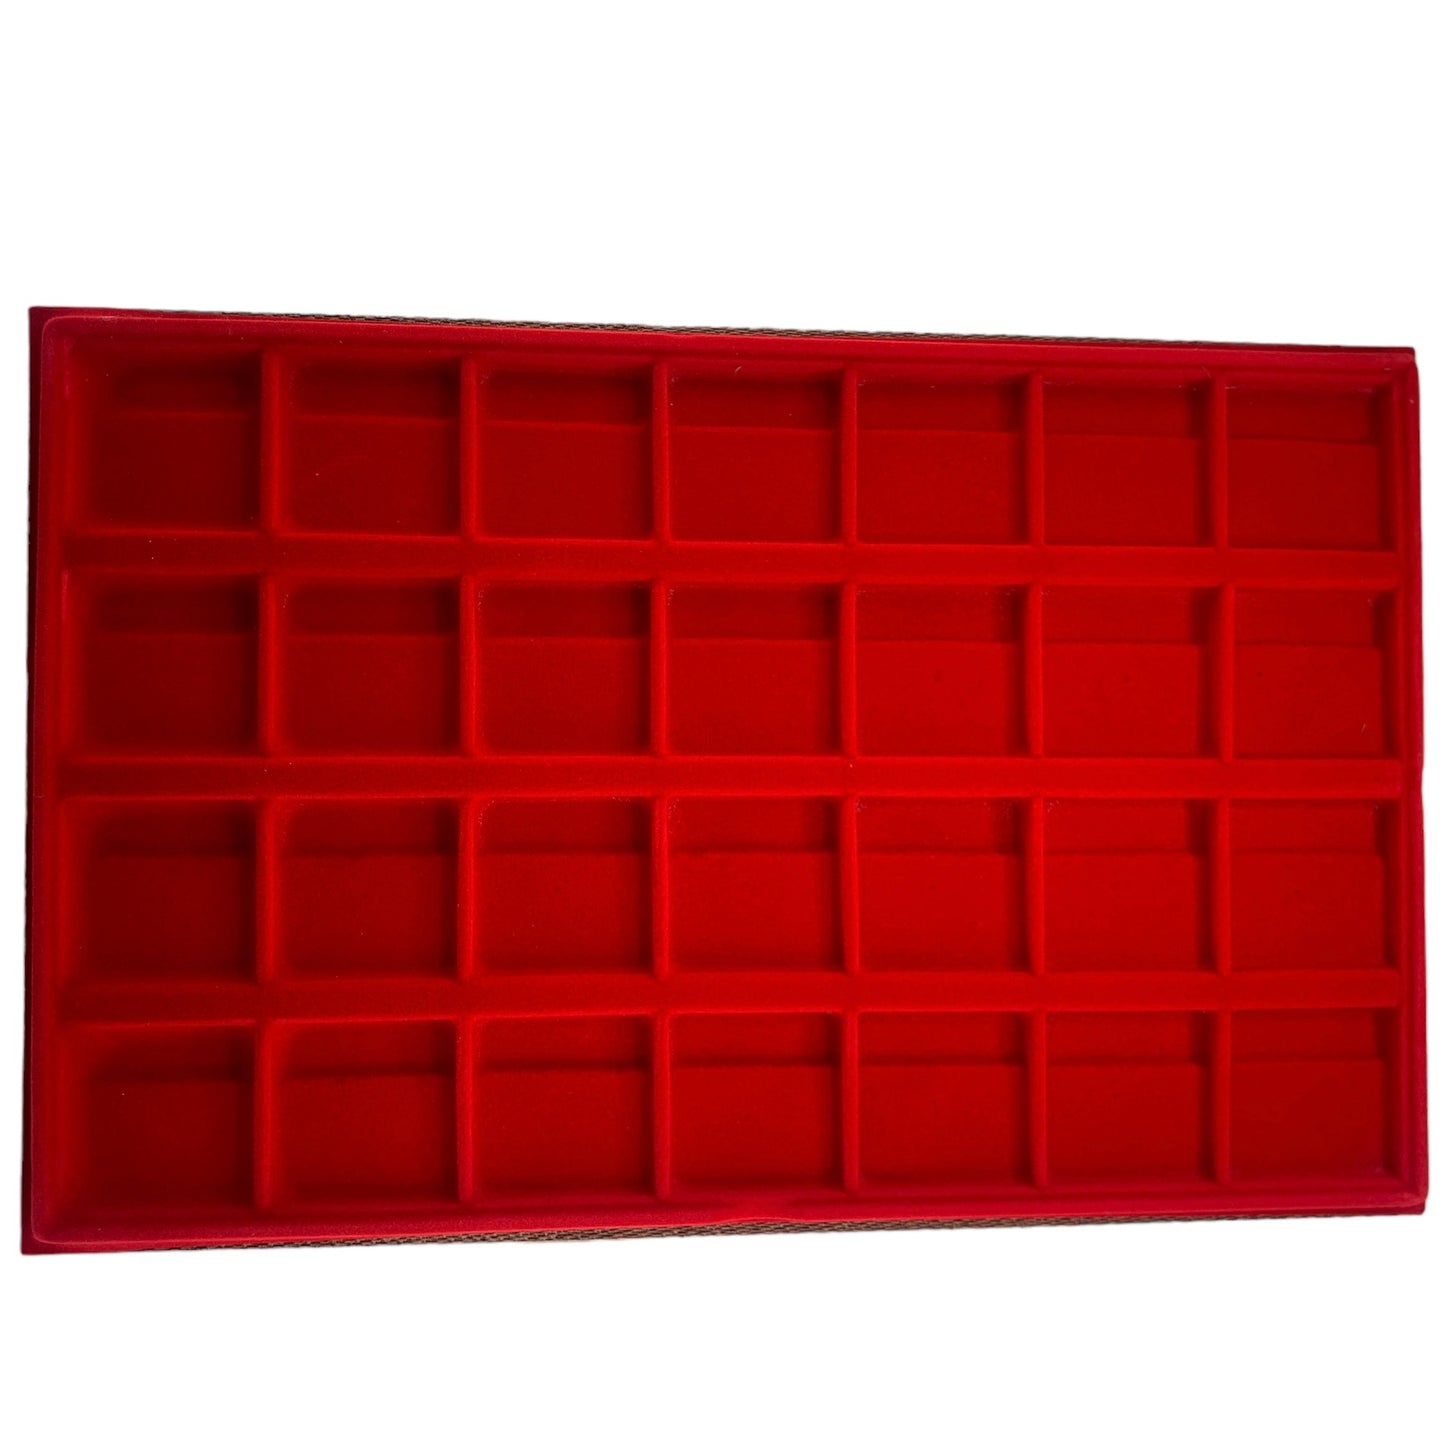 Falcon Coin Display Tray: For 2x2 Holders by Edgar Marcus - RED